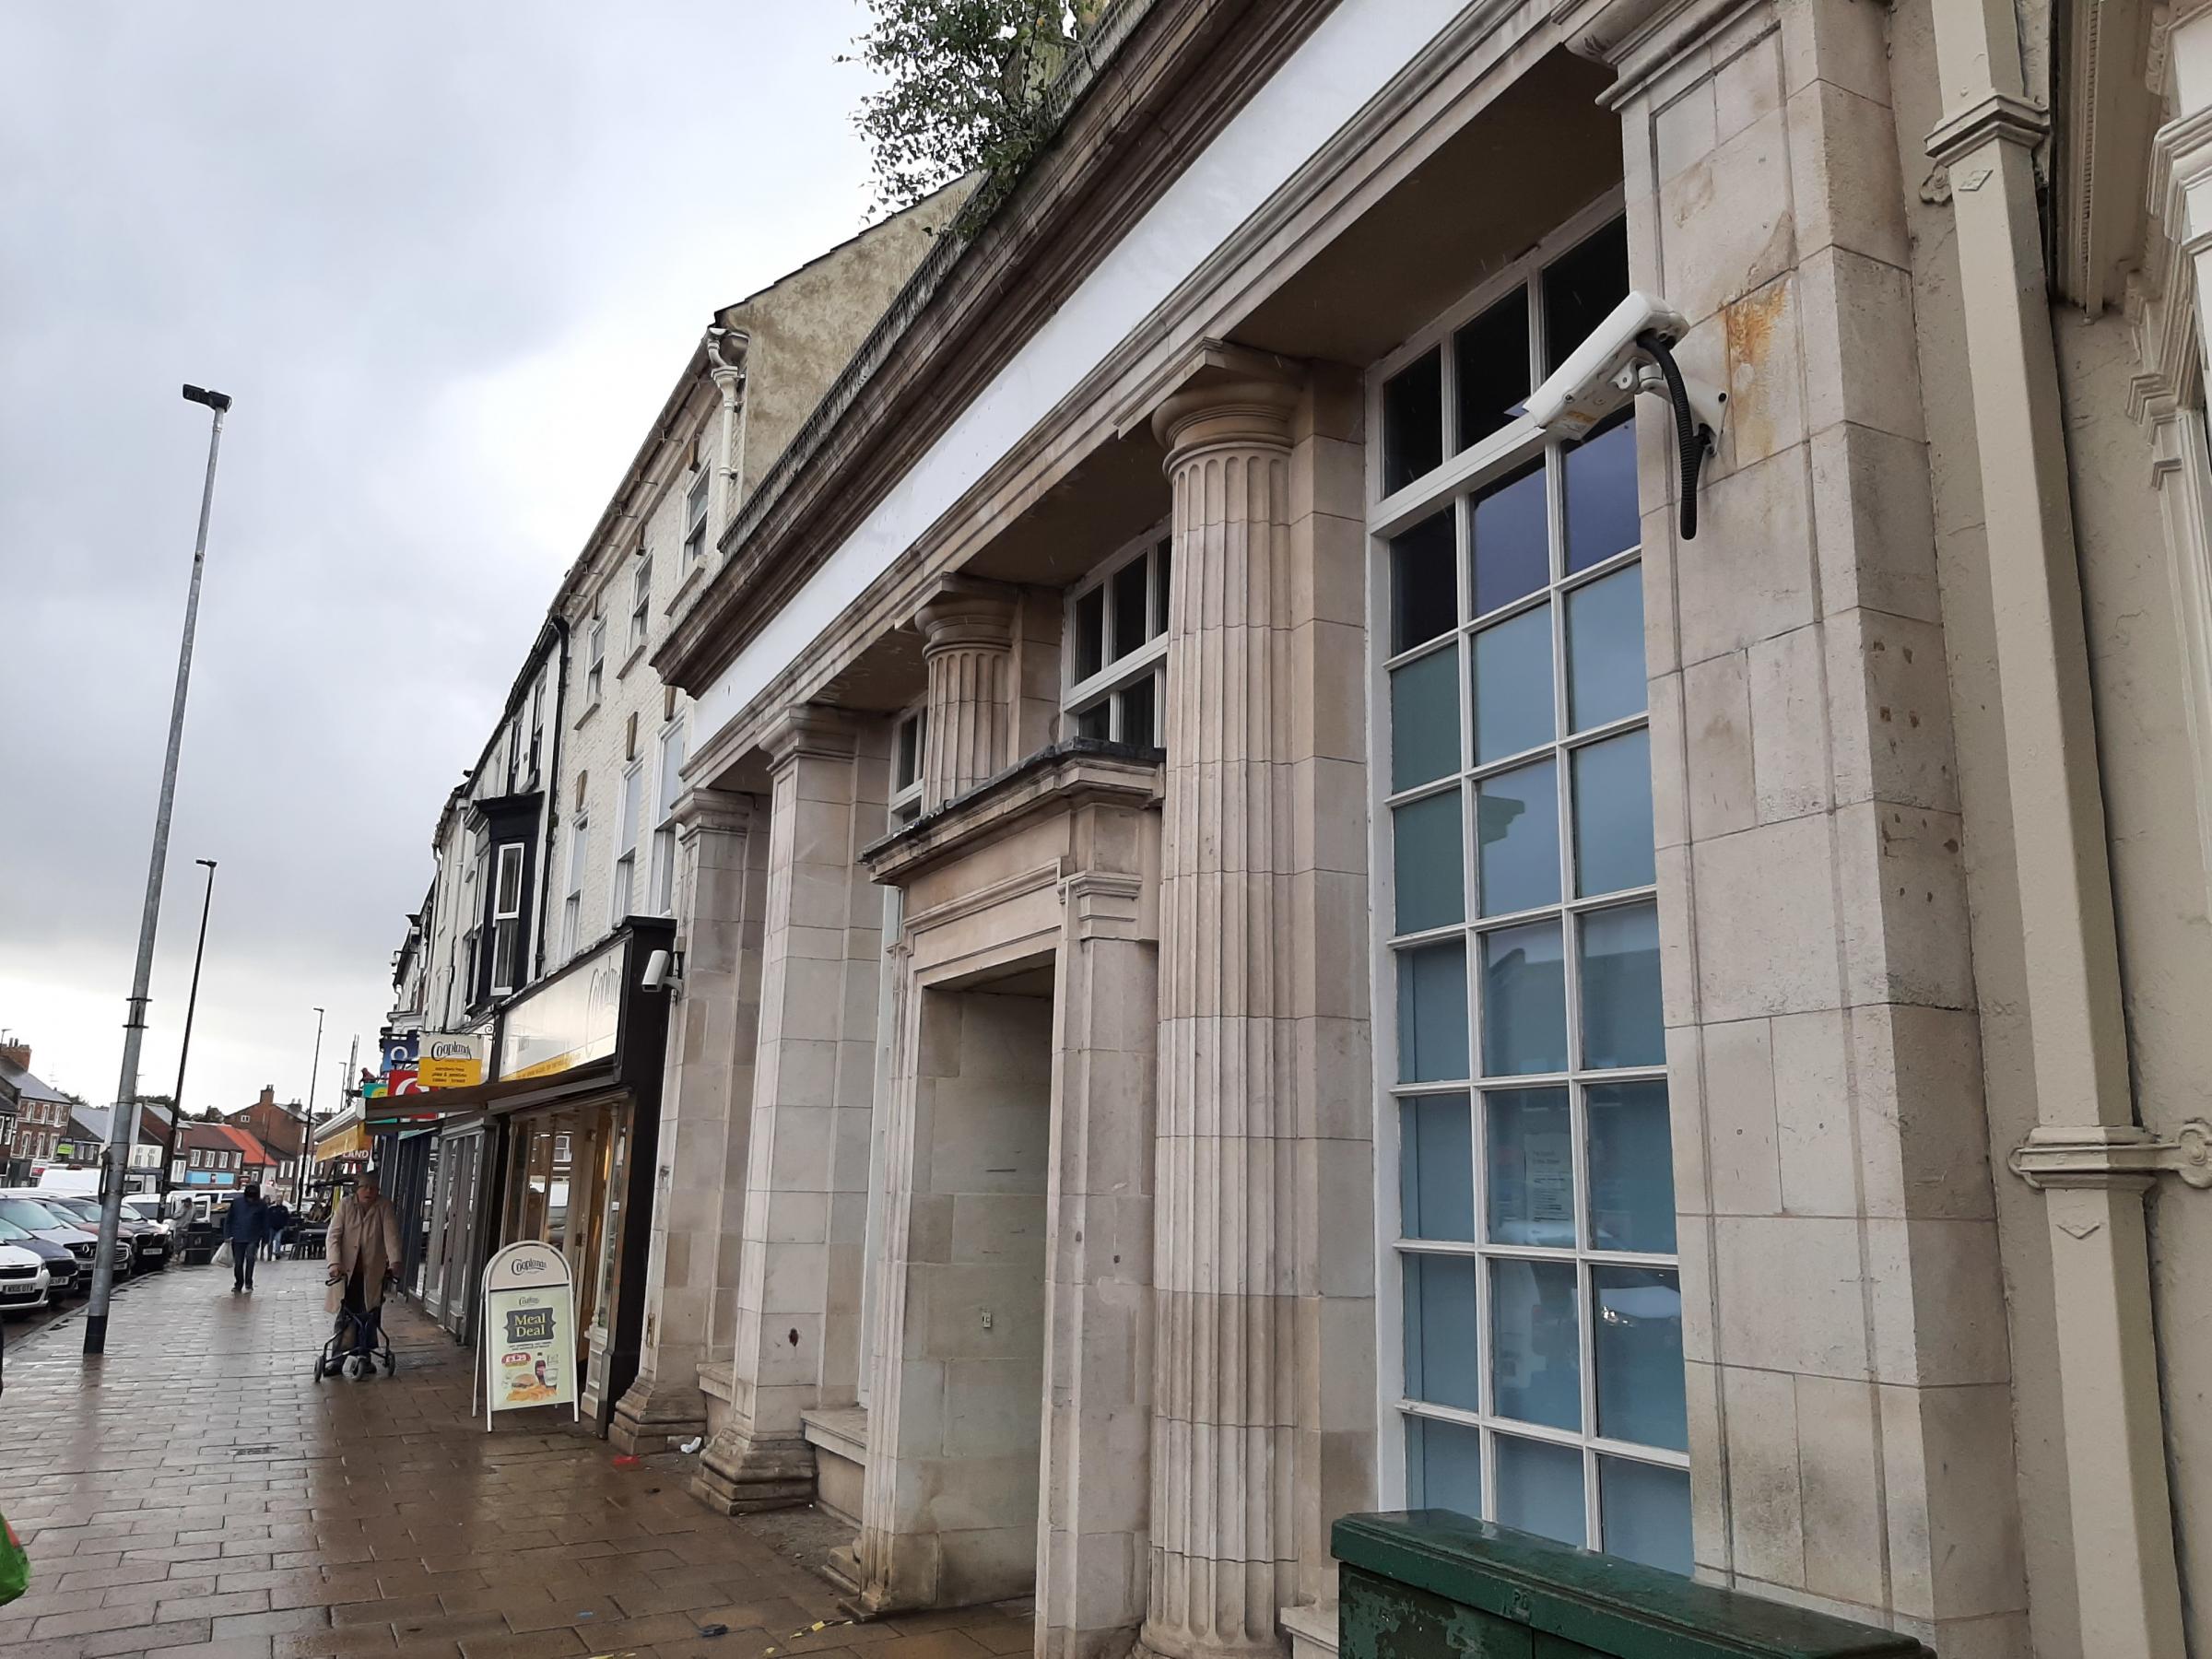 Cafe bar plans submitted for former Northallerton HSBC bank